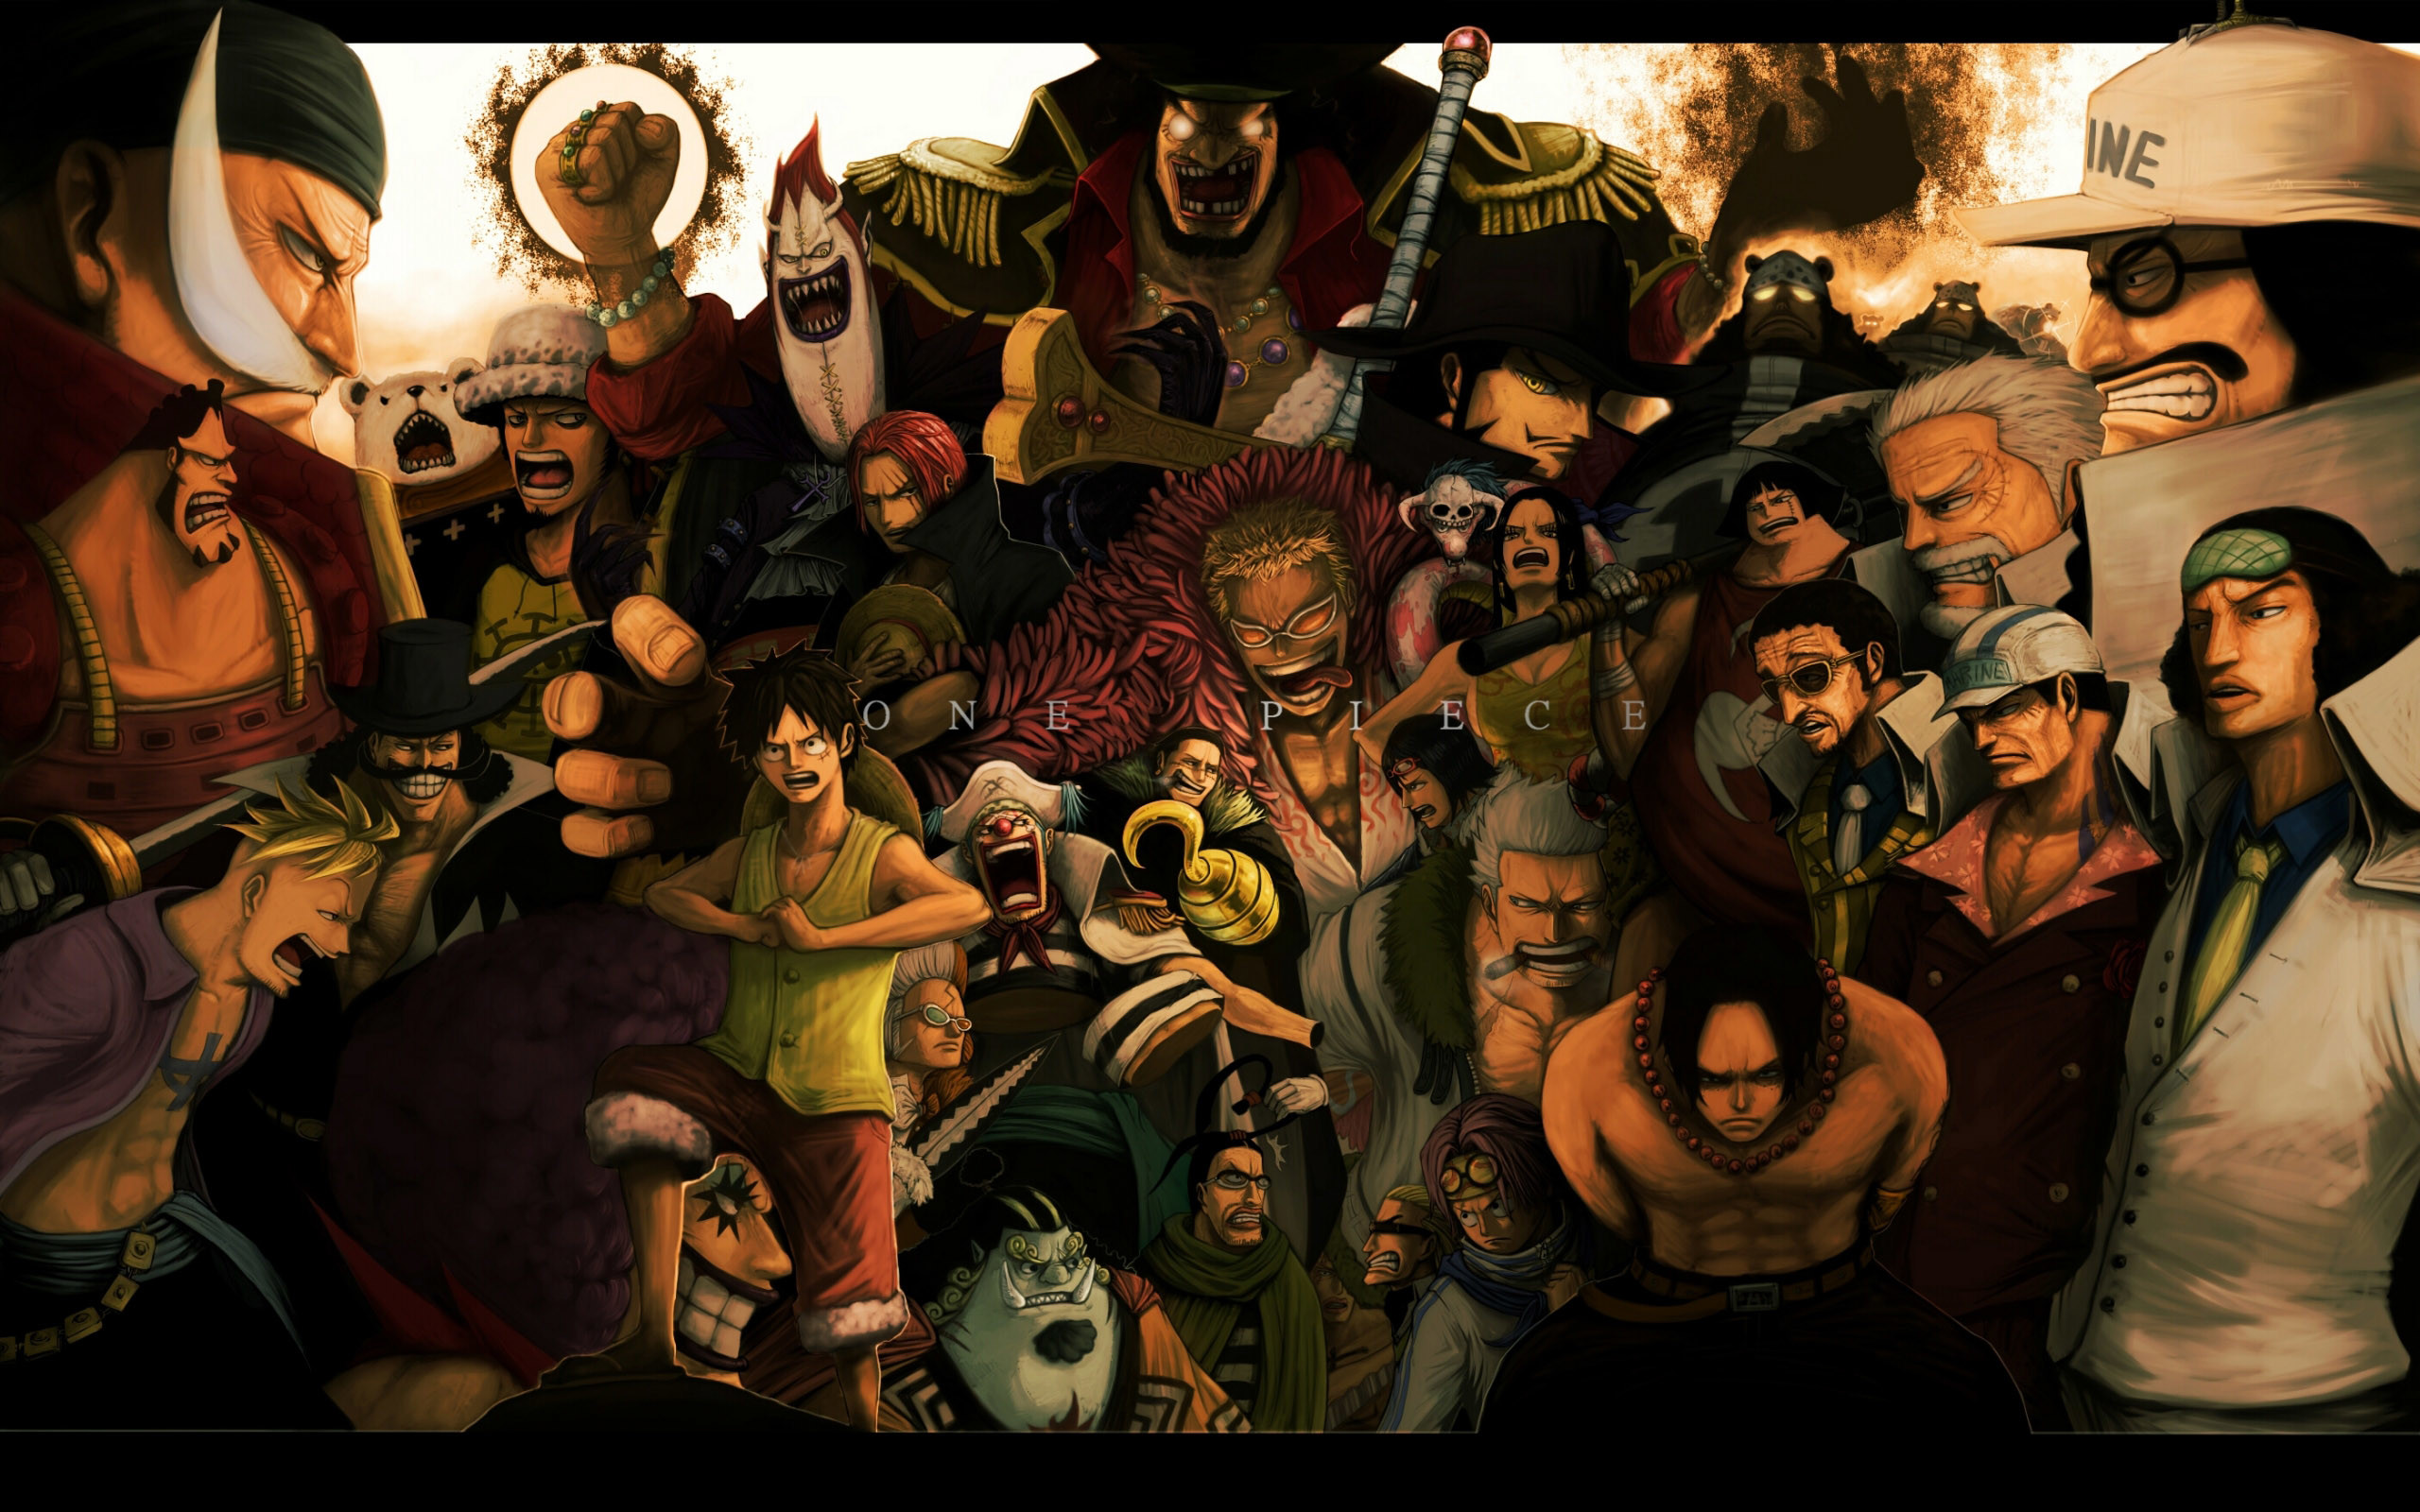 2560x1600 Attachment for One Piece Wallpaper - All Characters of Pirates ...